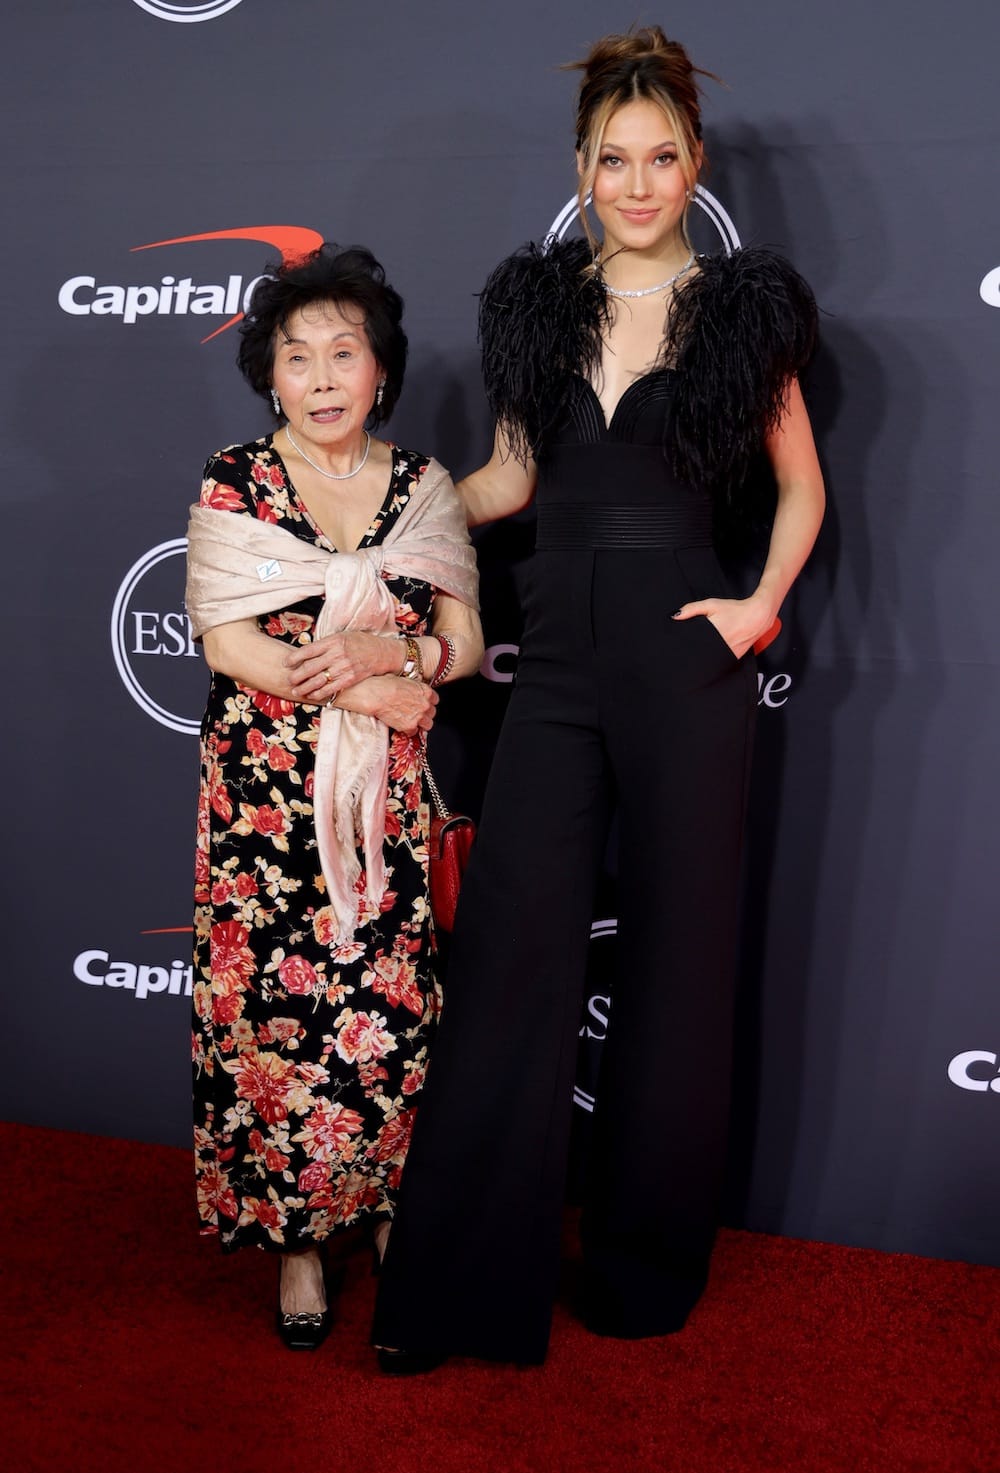 Eileen Gu with her grandmother Feng Guozhen at the 2022 ESPYs on July 20th.